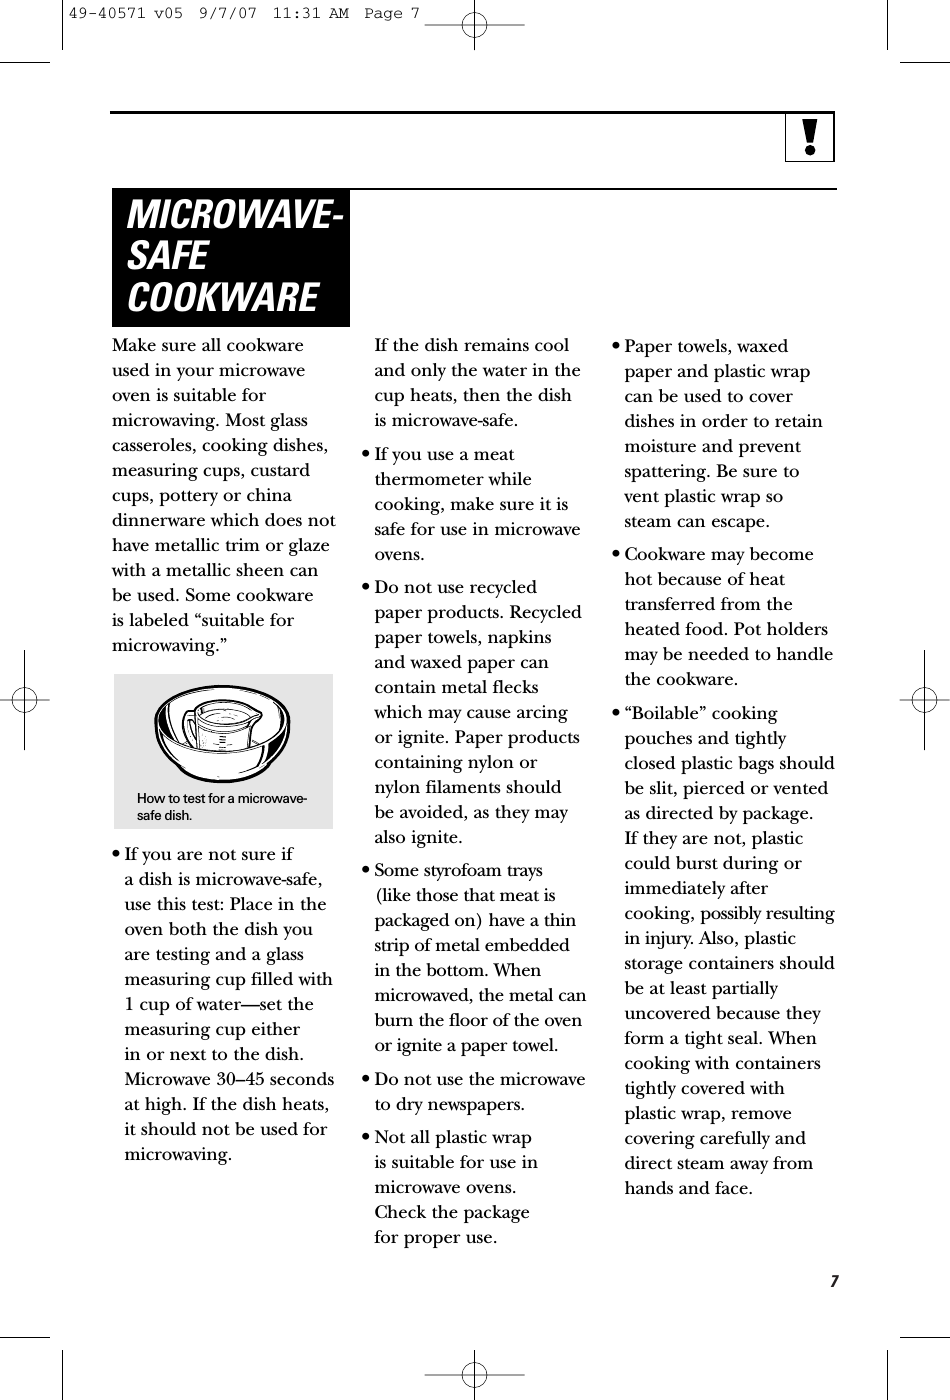 7Make sure all cookwareused in your microwaveoven is suitable formicrowaving. Most glasscasseroles, cooking dishes,measuring cups, custardcups, pottery or chinadinnerware which does nothave metallic trim or glazewith a metallic sheen canbe used. Some cookware is labeled “suitable formicrowaving.”•If you are not sure if a dish is microwave-safe,use this test: Place in theoven both the dish youare testing and a glassmeasuring cup filled with1 cup of water—set themeasuring cup either in or next to the dish.Microwave 30–45 secondsat high. If the dish heats,it should not be used formicrowaving. If the dish remains cooland only the water in thecup heats, then the dishis microwave-safe.•If you use a meat thermometer whilecooking, make sure it issafe for use in microwaveovens.•Do not use recycledpaper products. Recycledpaper towels, napkinsand waxed paper cancontain metal fleckswhich may cause arcingor ignite. Paper productscontaining nylon ornylon filaments shouldbe avoided, as they mayalso ignite. •Some styrofoam trays (like those that meat ispackaged on) have a thinstrip of metal embeddedin the bottom. Whenmicrowaved, the metal canburn the floor of the ovenor ignite a paper towel.•Do not use the microwaveto dry newspapers.•Not all plastic wrap is suitable for use inmicrowave ovens. Check the package for proper use.•Paper towels, waxedpaper and plastic wrapcan be used to coverdishes in order to retainmoisture and preventspattering. Be sure tovent plastic wrap so steam can escape.•Cookware may becomehot because of heattransferred from theheated food. Pot holdersmay be needed to handlethe cookware.•“Boilable” cookingpouches and tightlyclosed plastic bags shouldbe slit, pierced or ventedas directed by package. If they are not, plasticcould burst during orimmediately aftercooking, possibly resultingin injury. Also, plasticstorage containers shouldbe at least partiallyuncovered because theyform a tight seal. Whencooking with containerstightly covered withplastic wrap, removecovering carefully anddirect steam away fromhands and face.MICROWAVE-SAFECOOKWAREHow to test for a microwave-safe dish.49-40571 v05  9/7/07  11:31 AM  Page 7